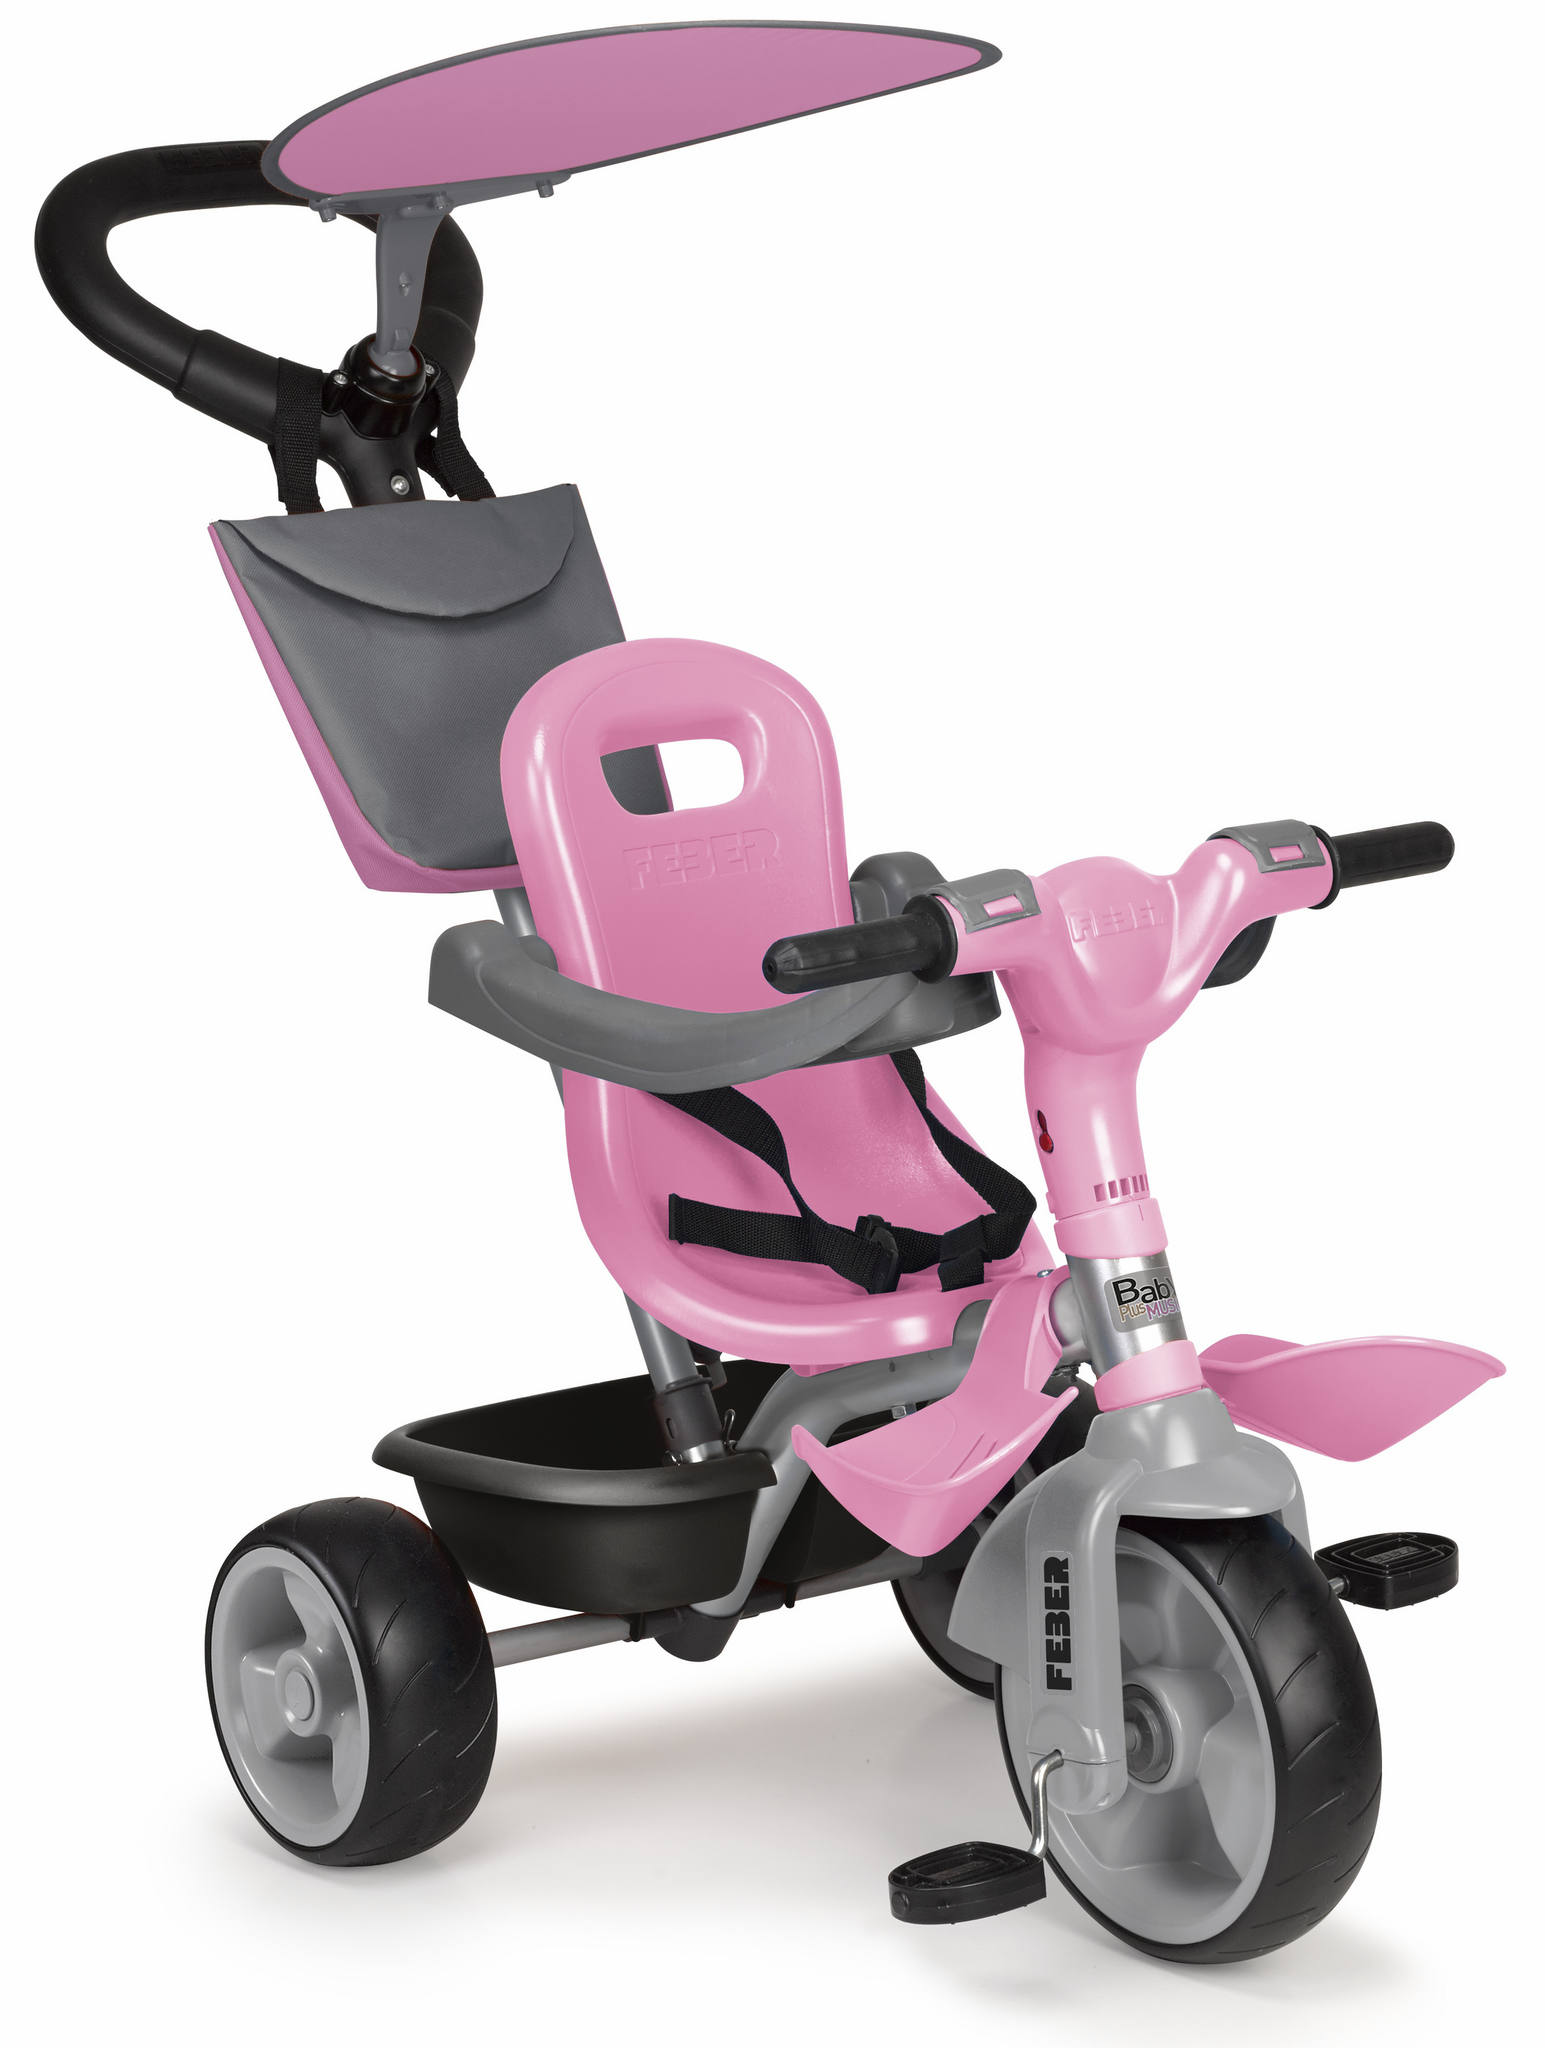 TRICICLO BABY PLUS MUSIC/PINK 12132 - N16123